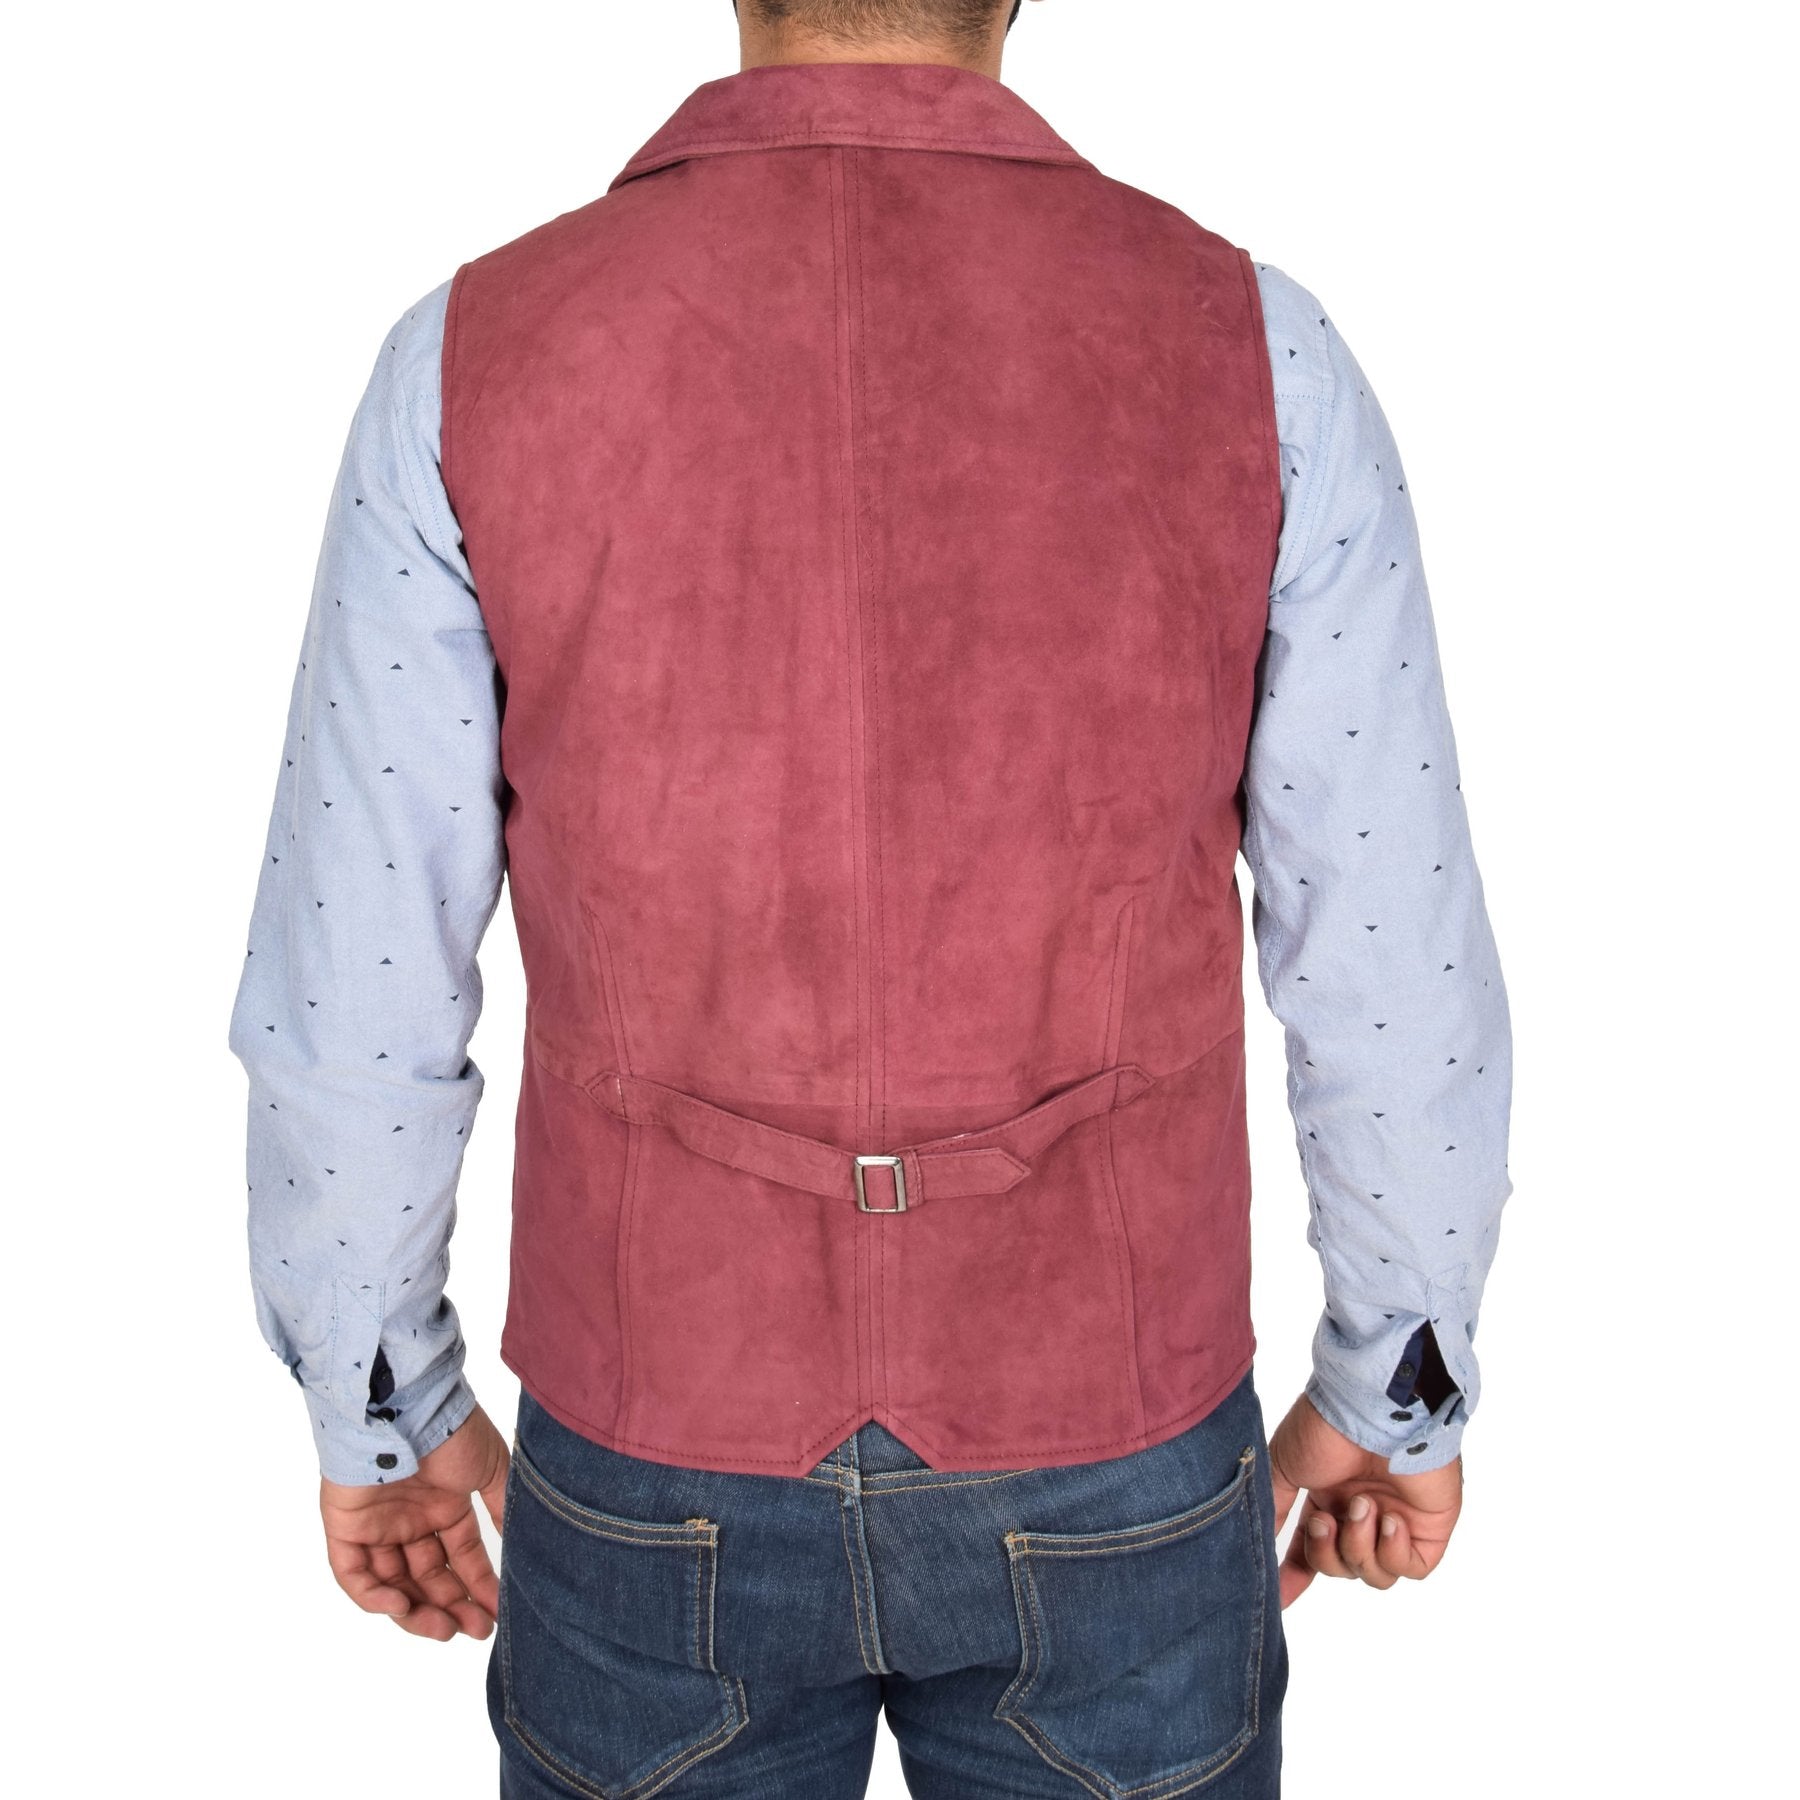 Spine Spark Men's Maroon Soft Suede Leather Classic Style Vest